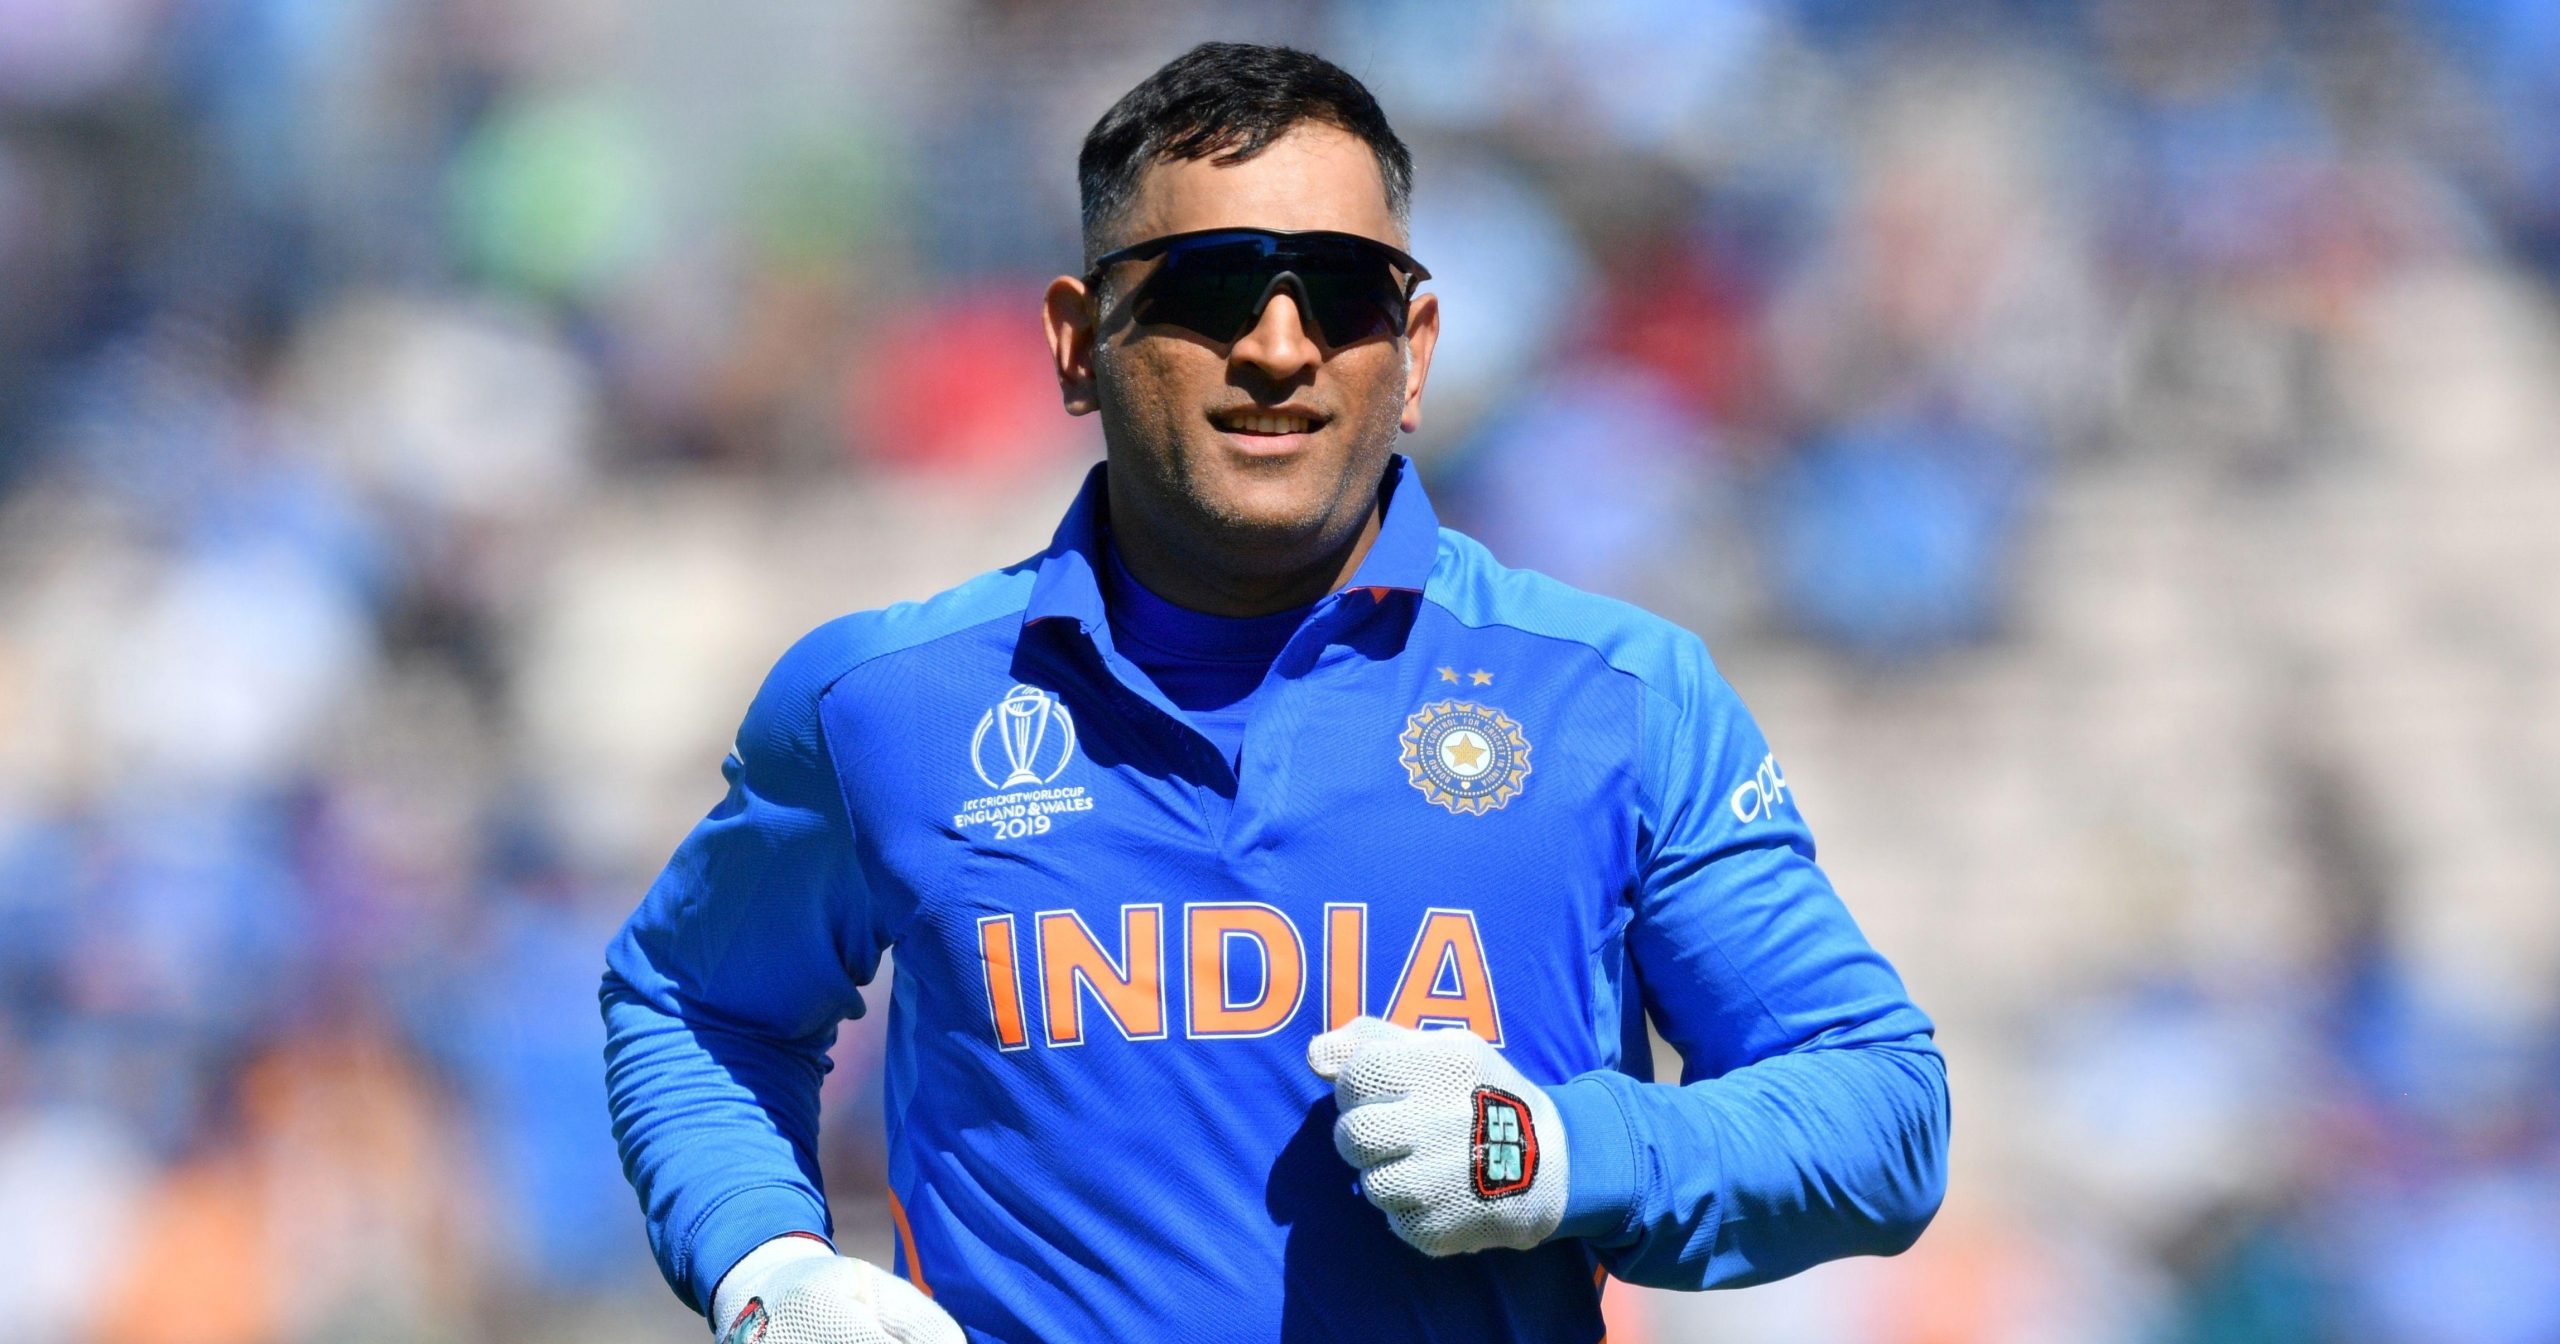 When MS Dhoni Shut Down A Twitter User With A Sharp-Witted Reply